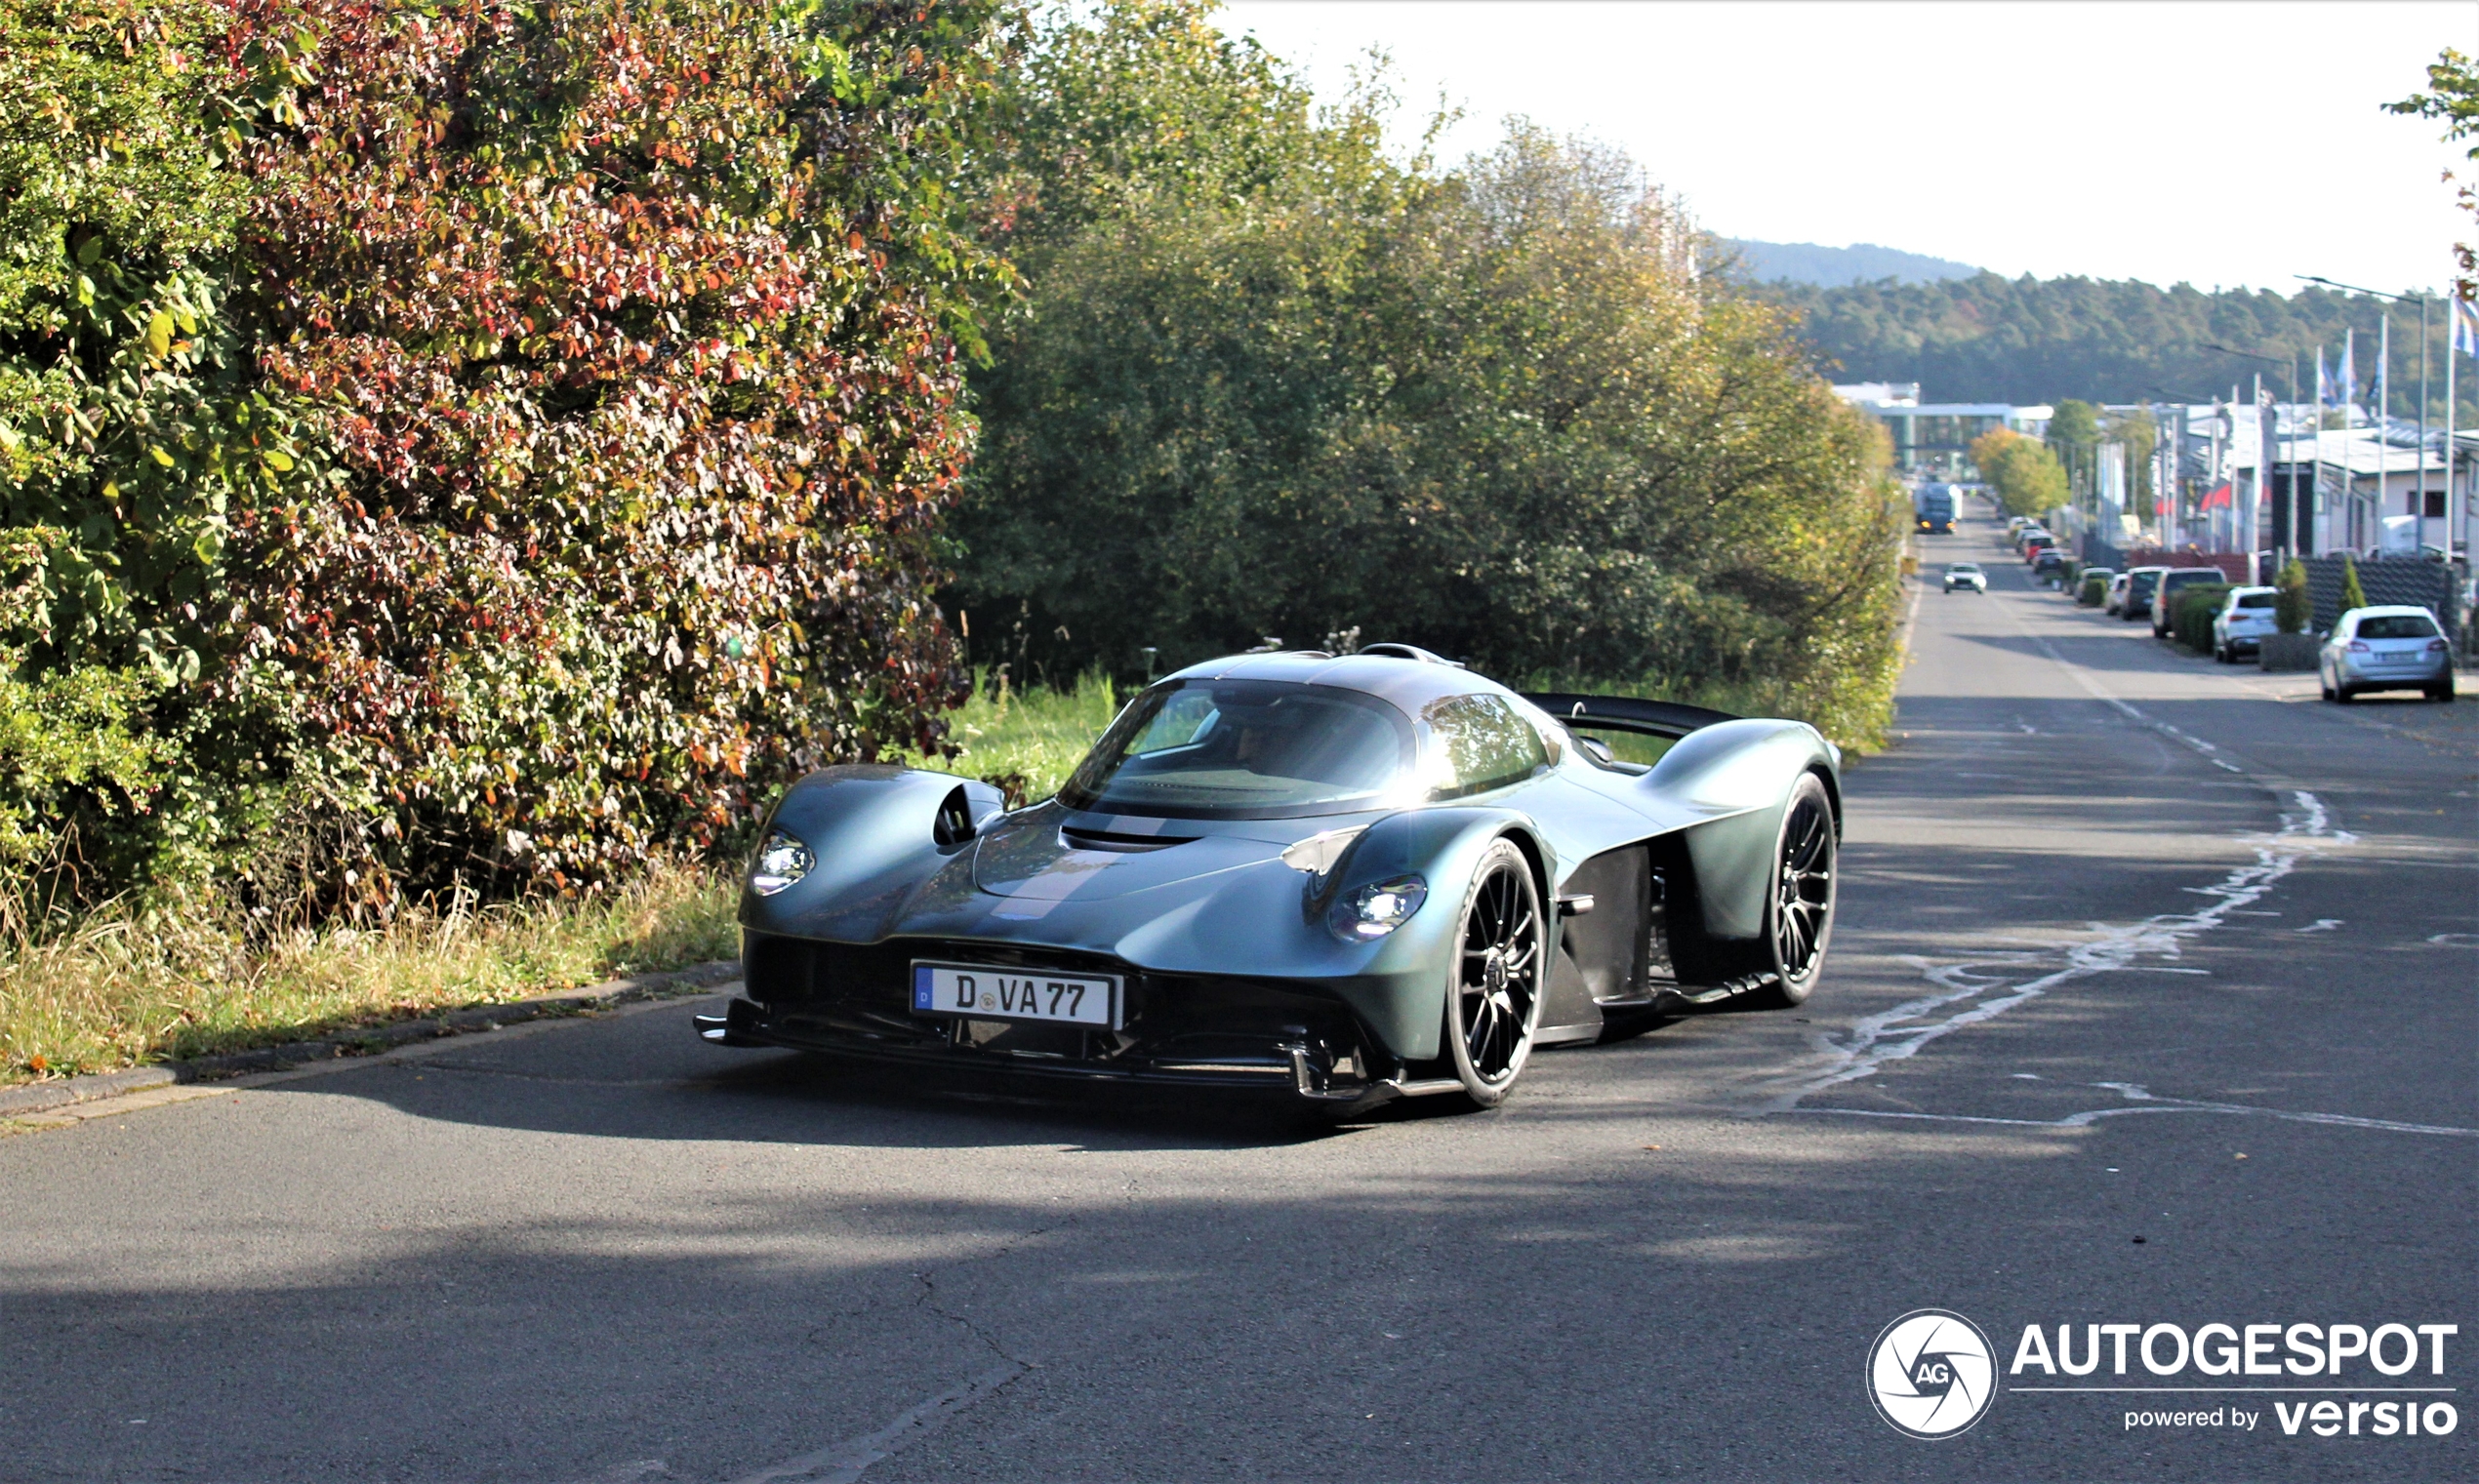 Another Aston Martin Valkyrie surfaces at the Nürburgring